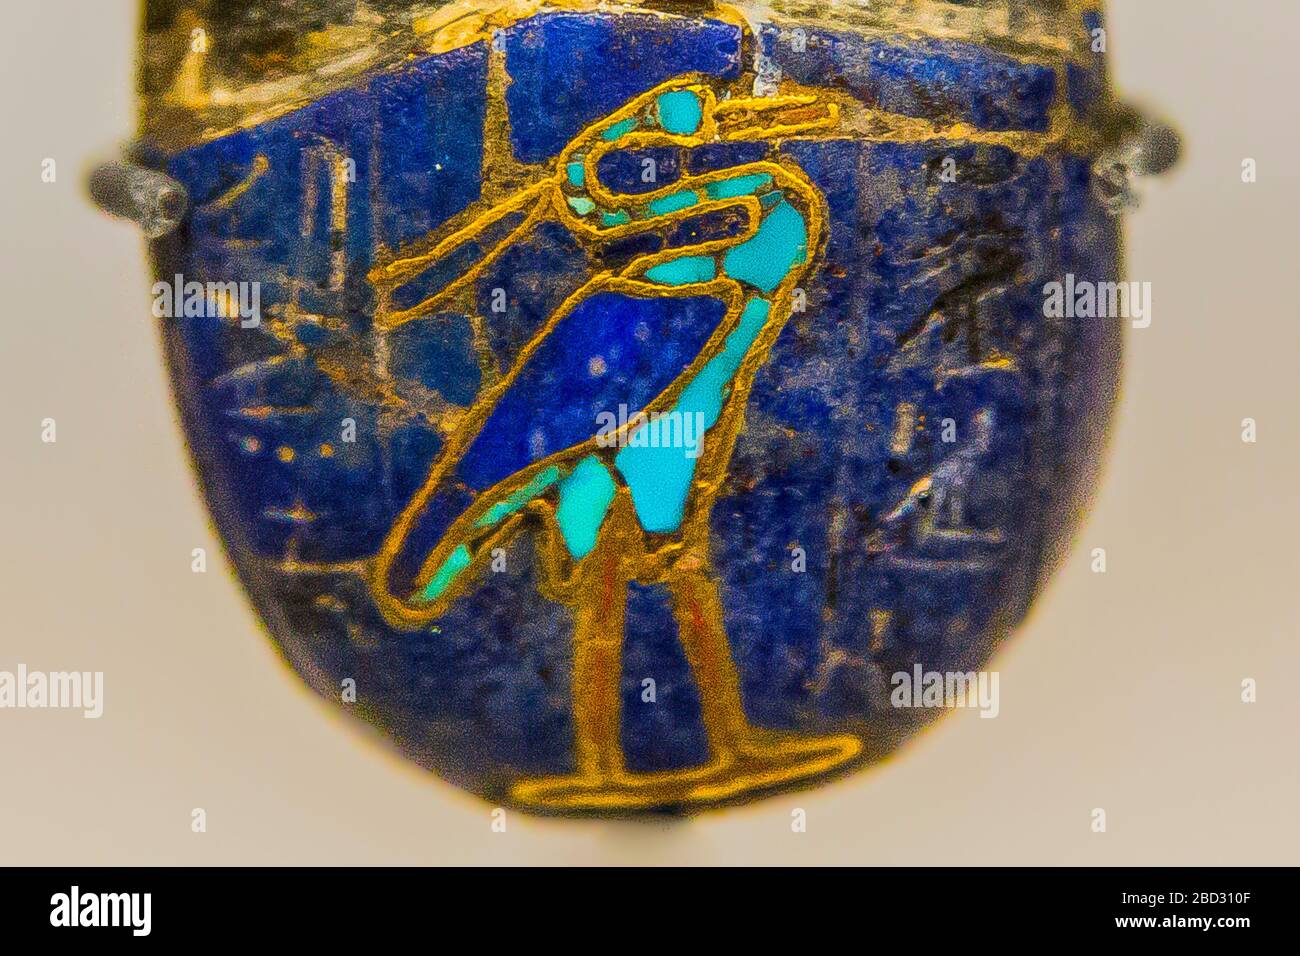 Exhibition 'The animal kingdom in Ancient Egypt', Louvre-Lens museum. Heart scarab depicting a phoenix (Benu bird). E 3085. Stock Photo